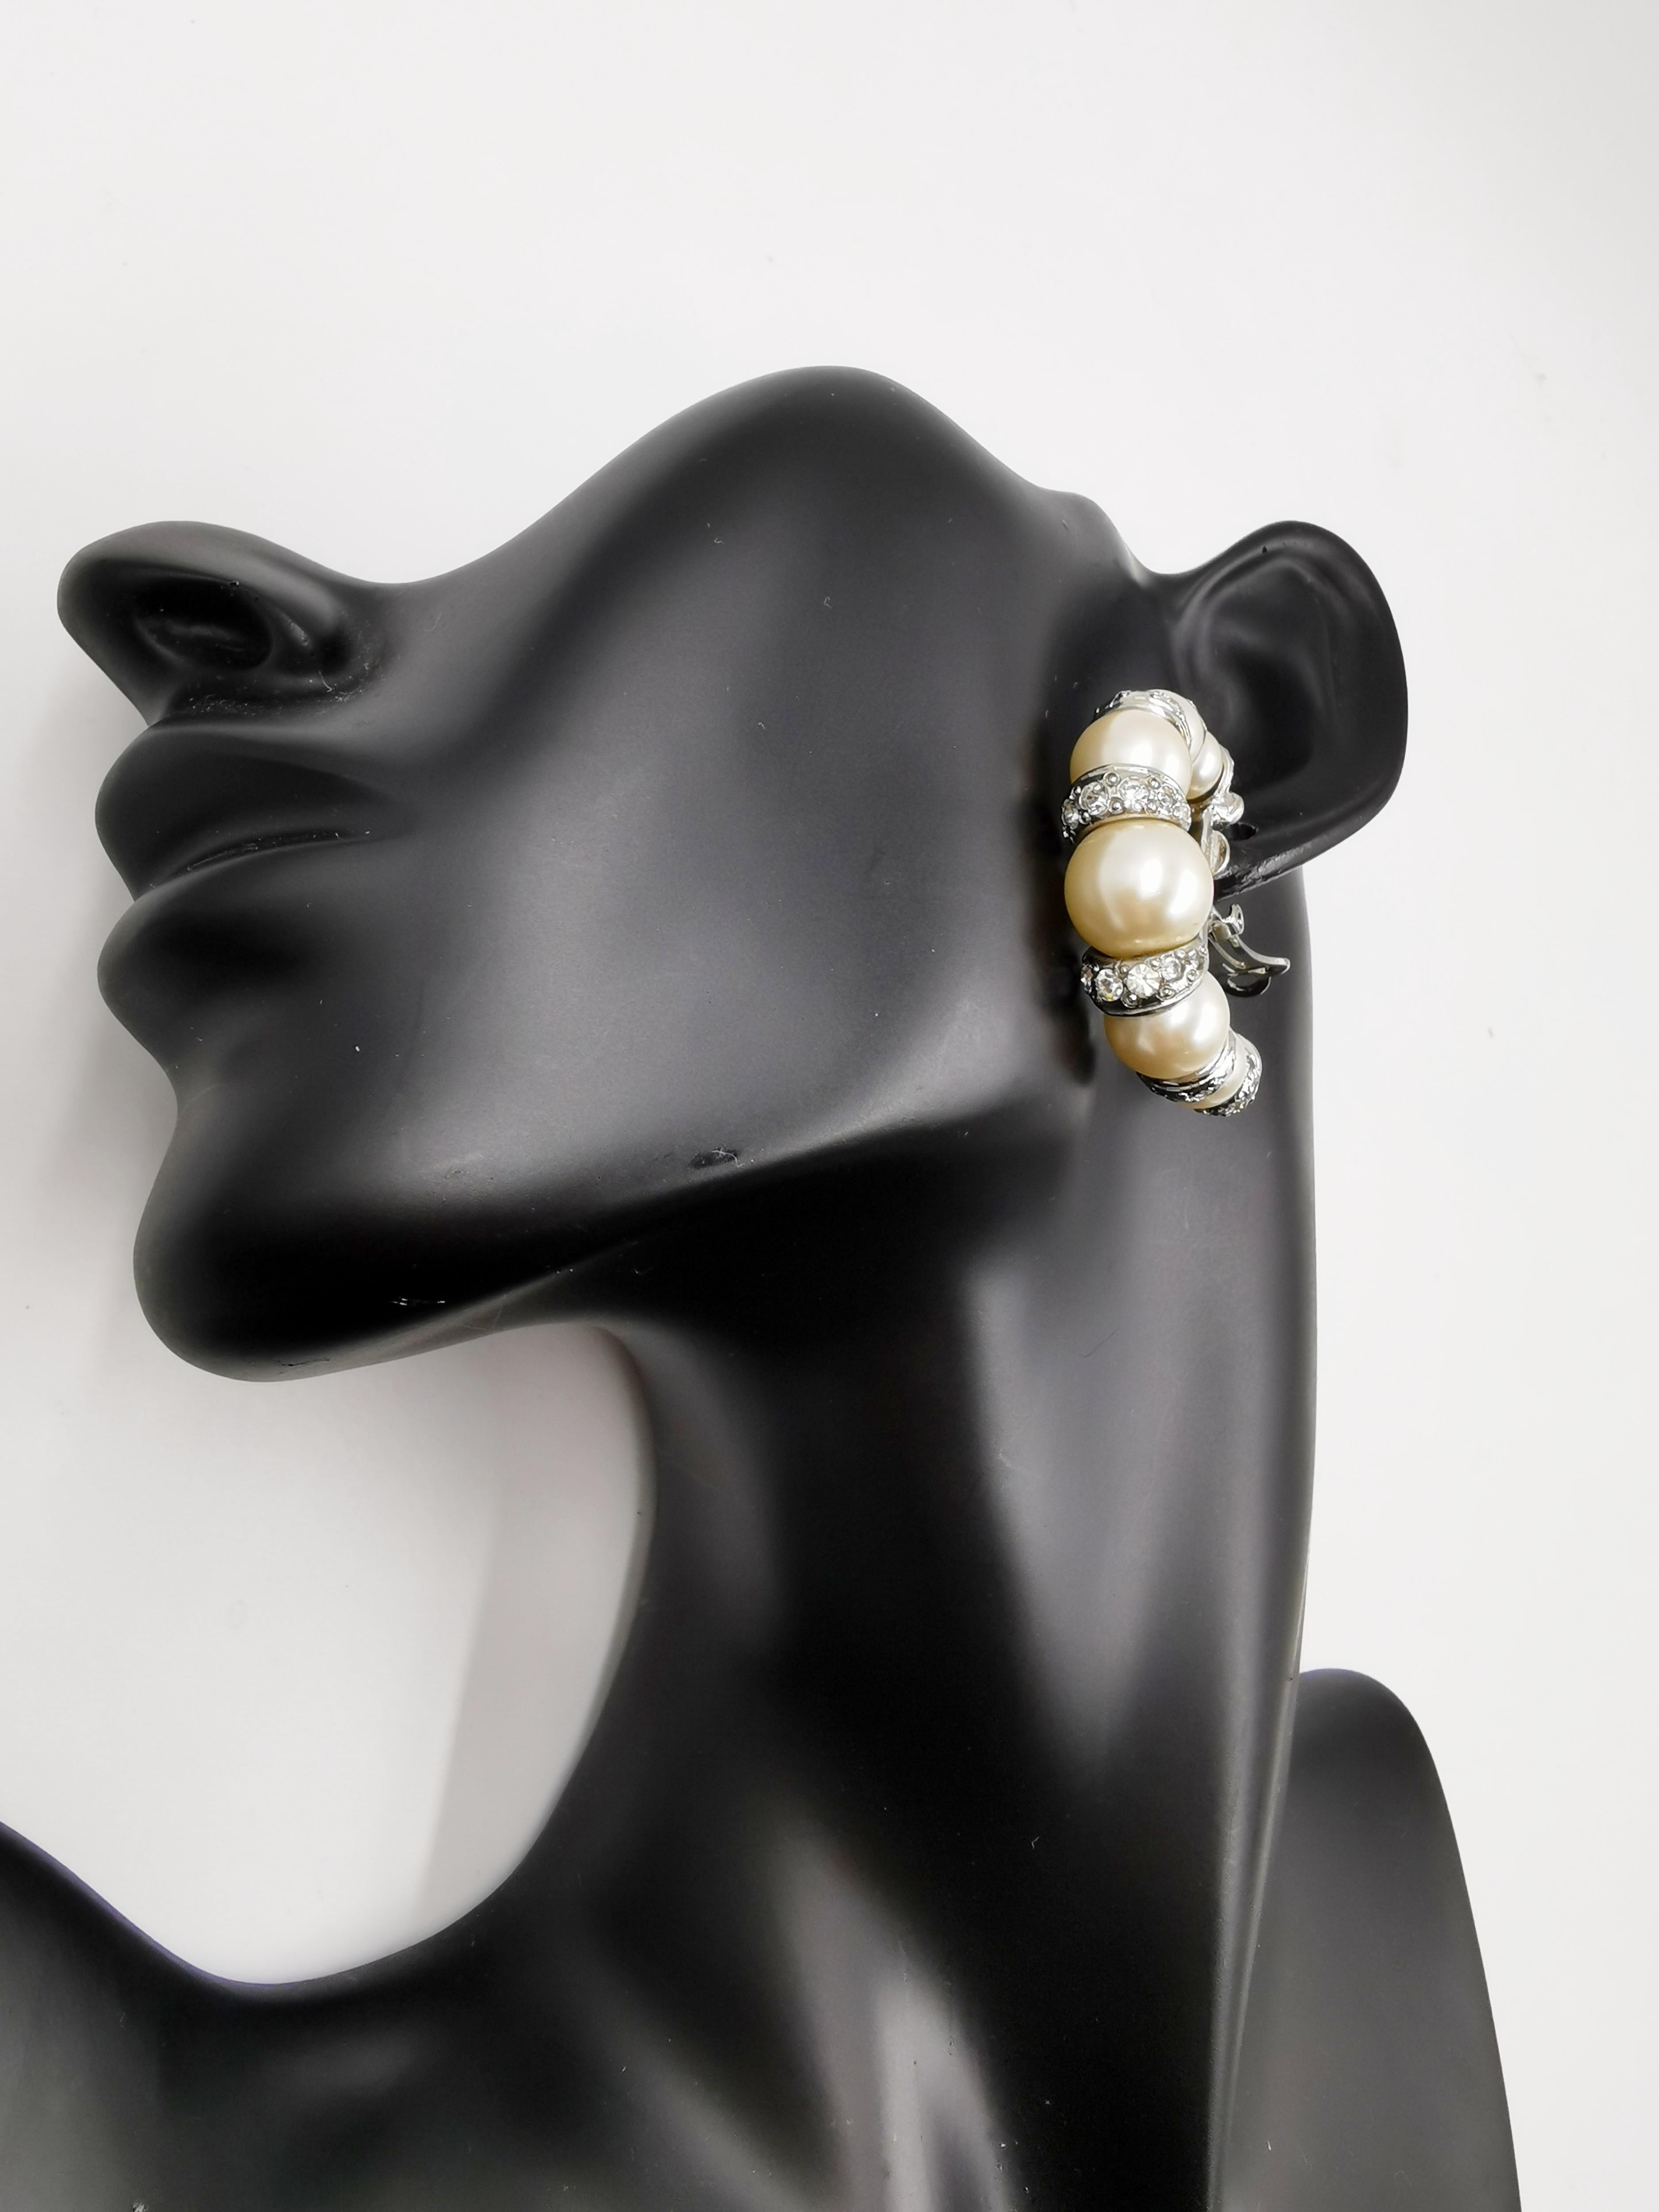 Vintage Gianni Versace Pearl Hoop Earrings, this brand new vintage item still in original box is not to be seen elsewhere. A versace collector piece!

Feature
Material: Silver tone Metal and Pearls
Condition: Very good vintage condition, one of the